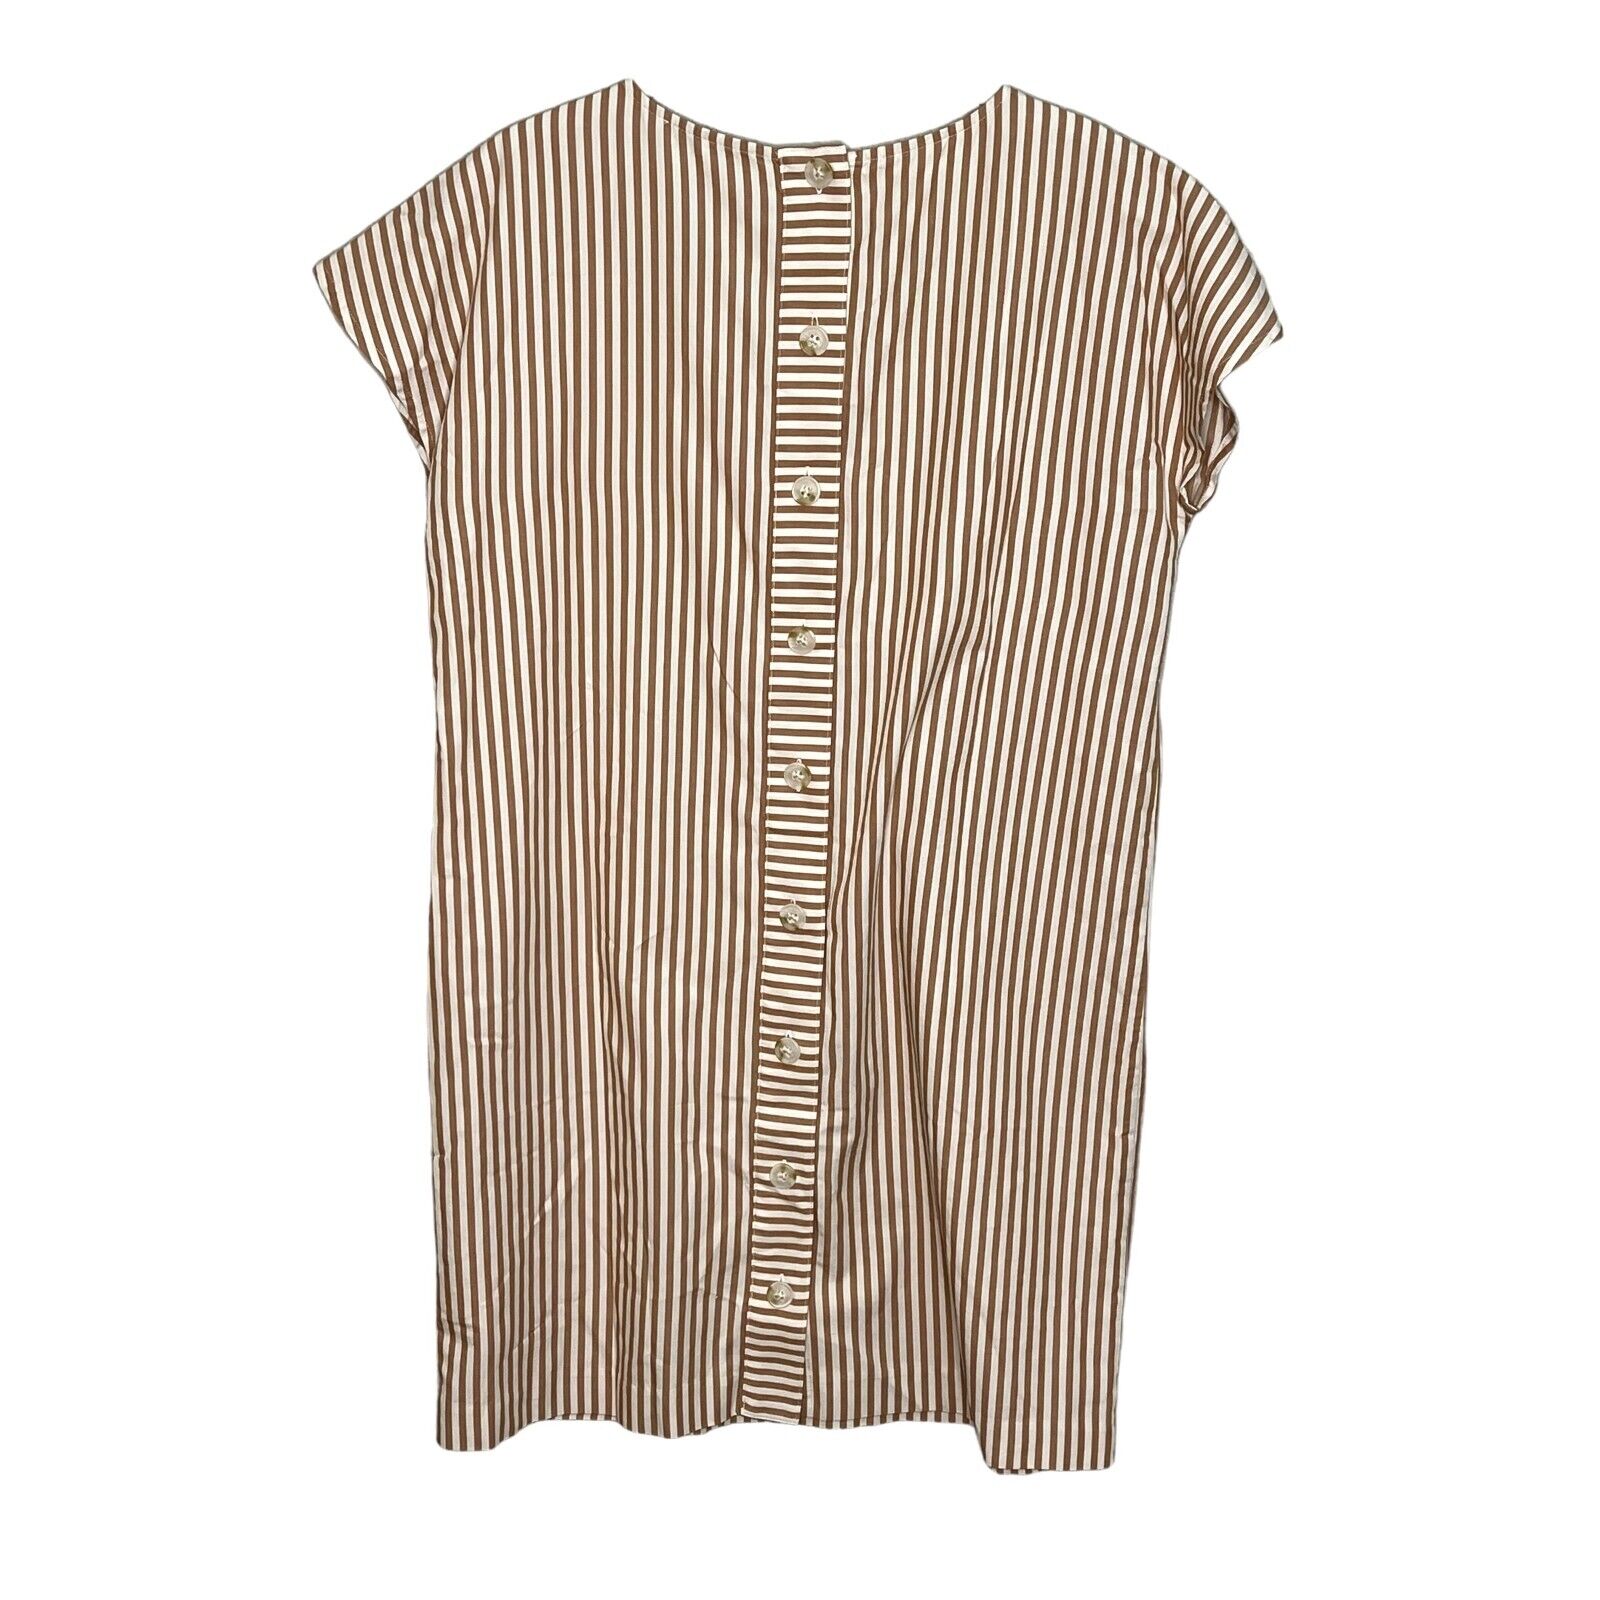 Madewell Tan and White Striped Button-Back Easy Dress Size Small